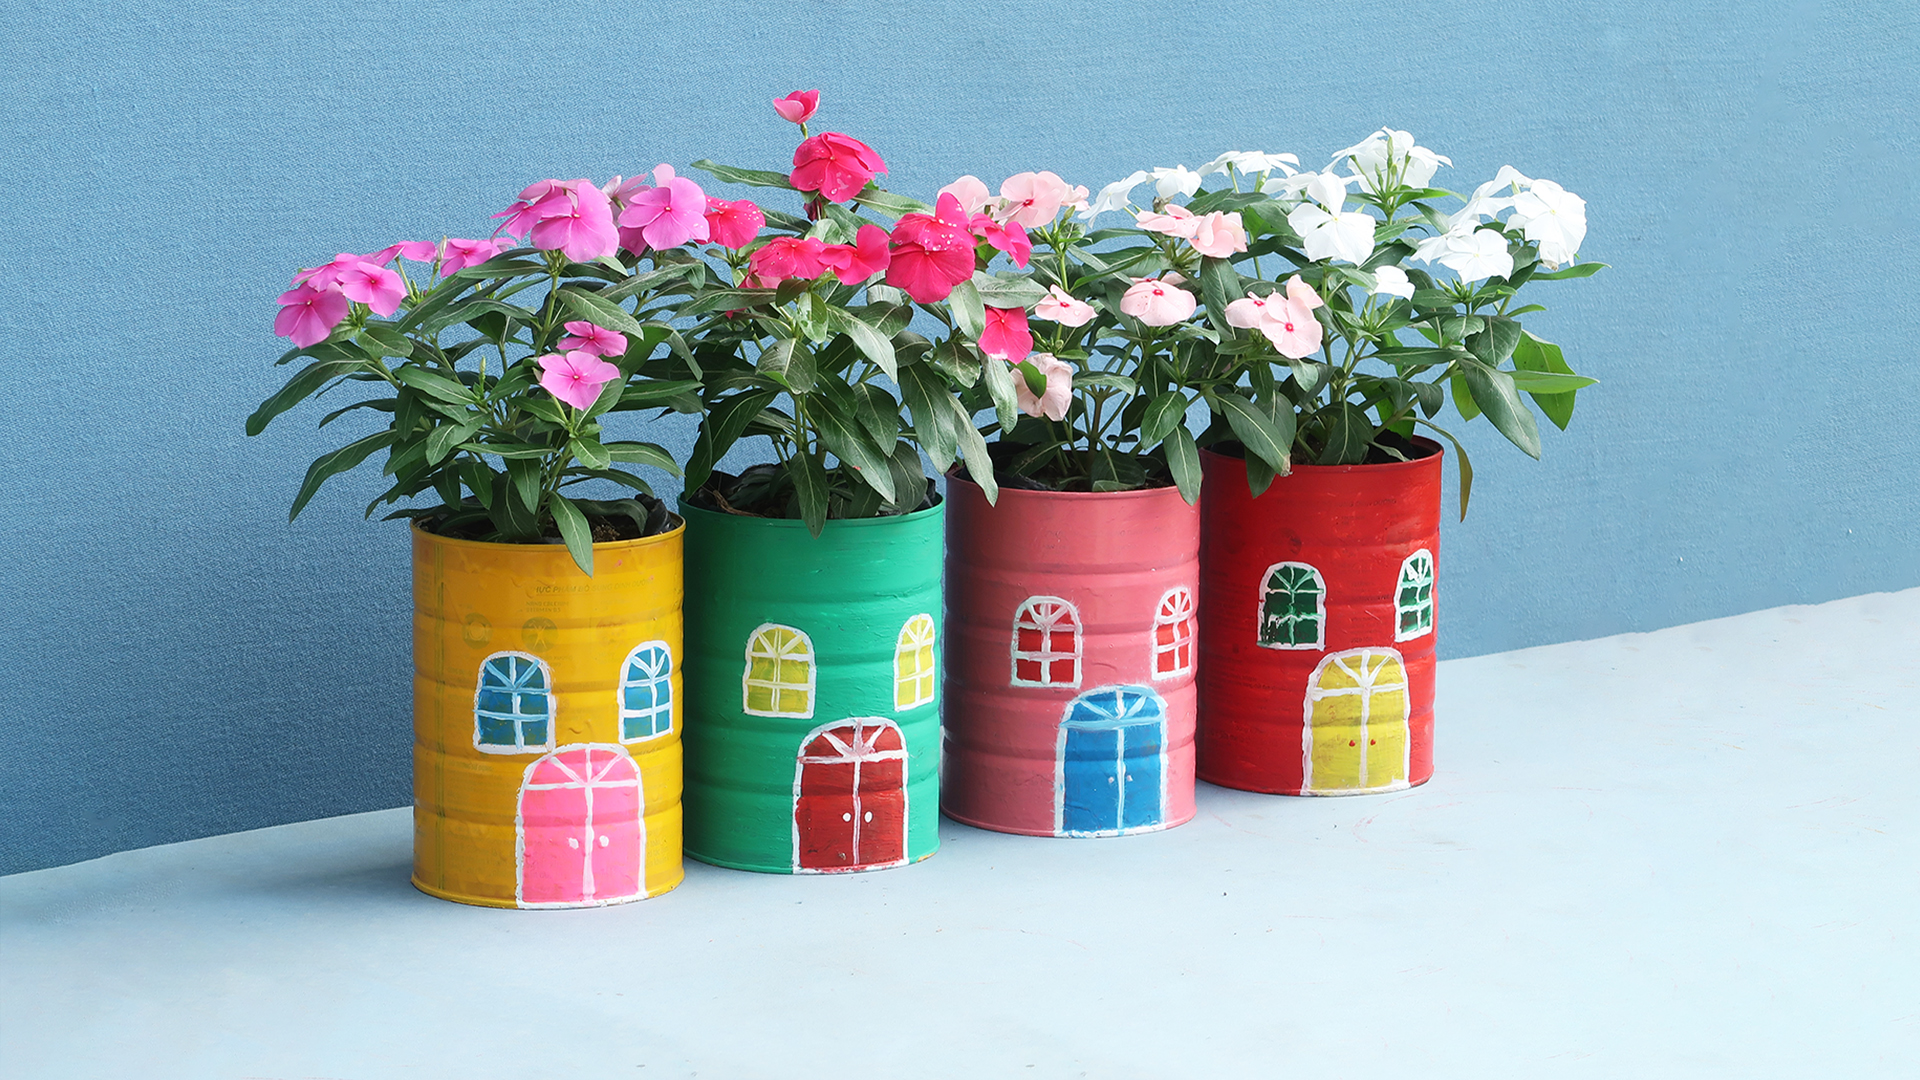 Recycle The Milk Bottle To Make A Beautiful Home Garden